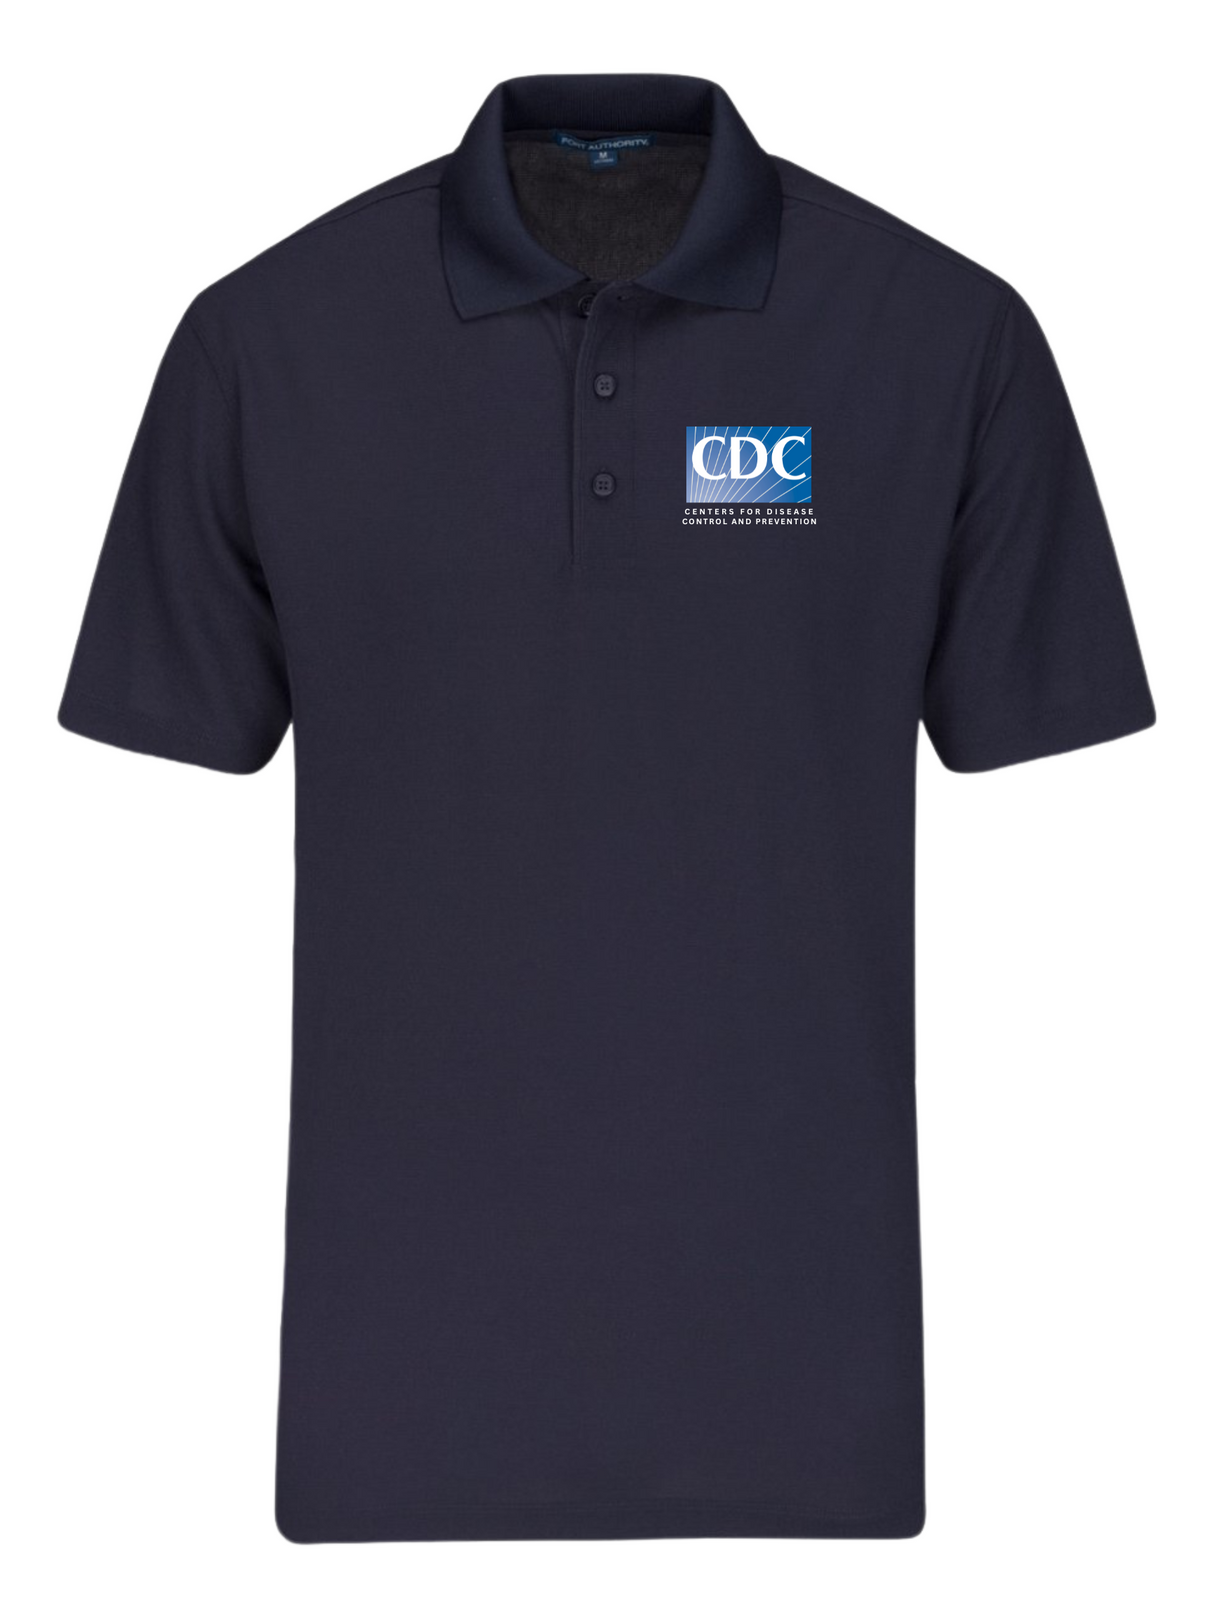 Centers for Disease Control and Prevention Polo Shirt - Men's Short Sleeve - FEDS Apparel